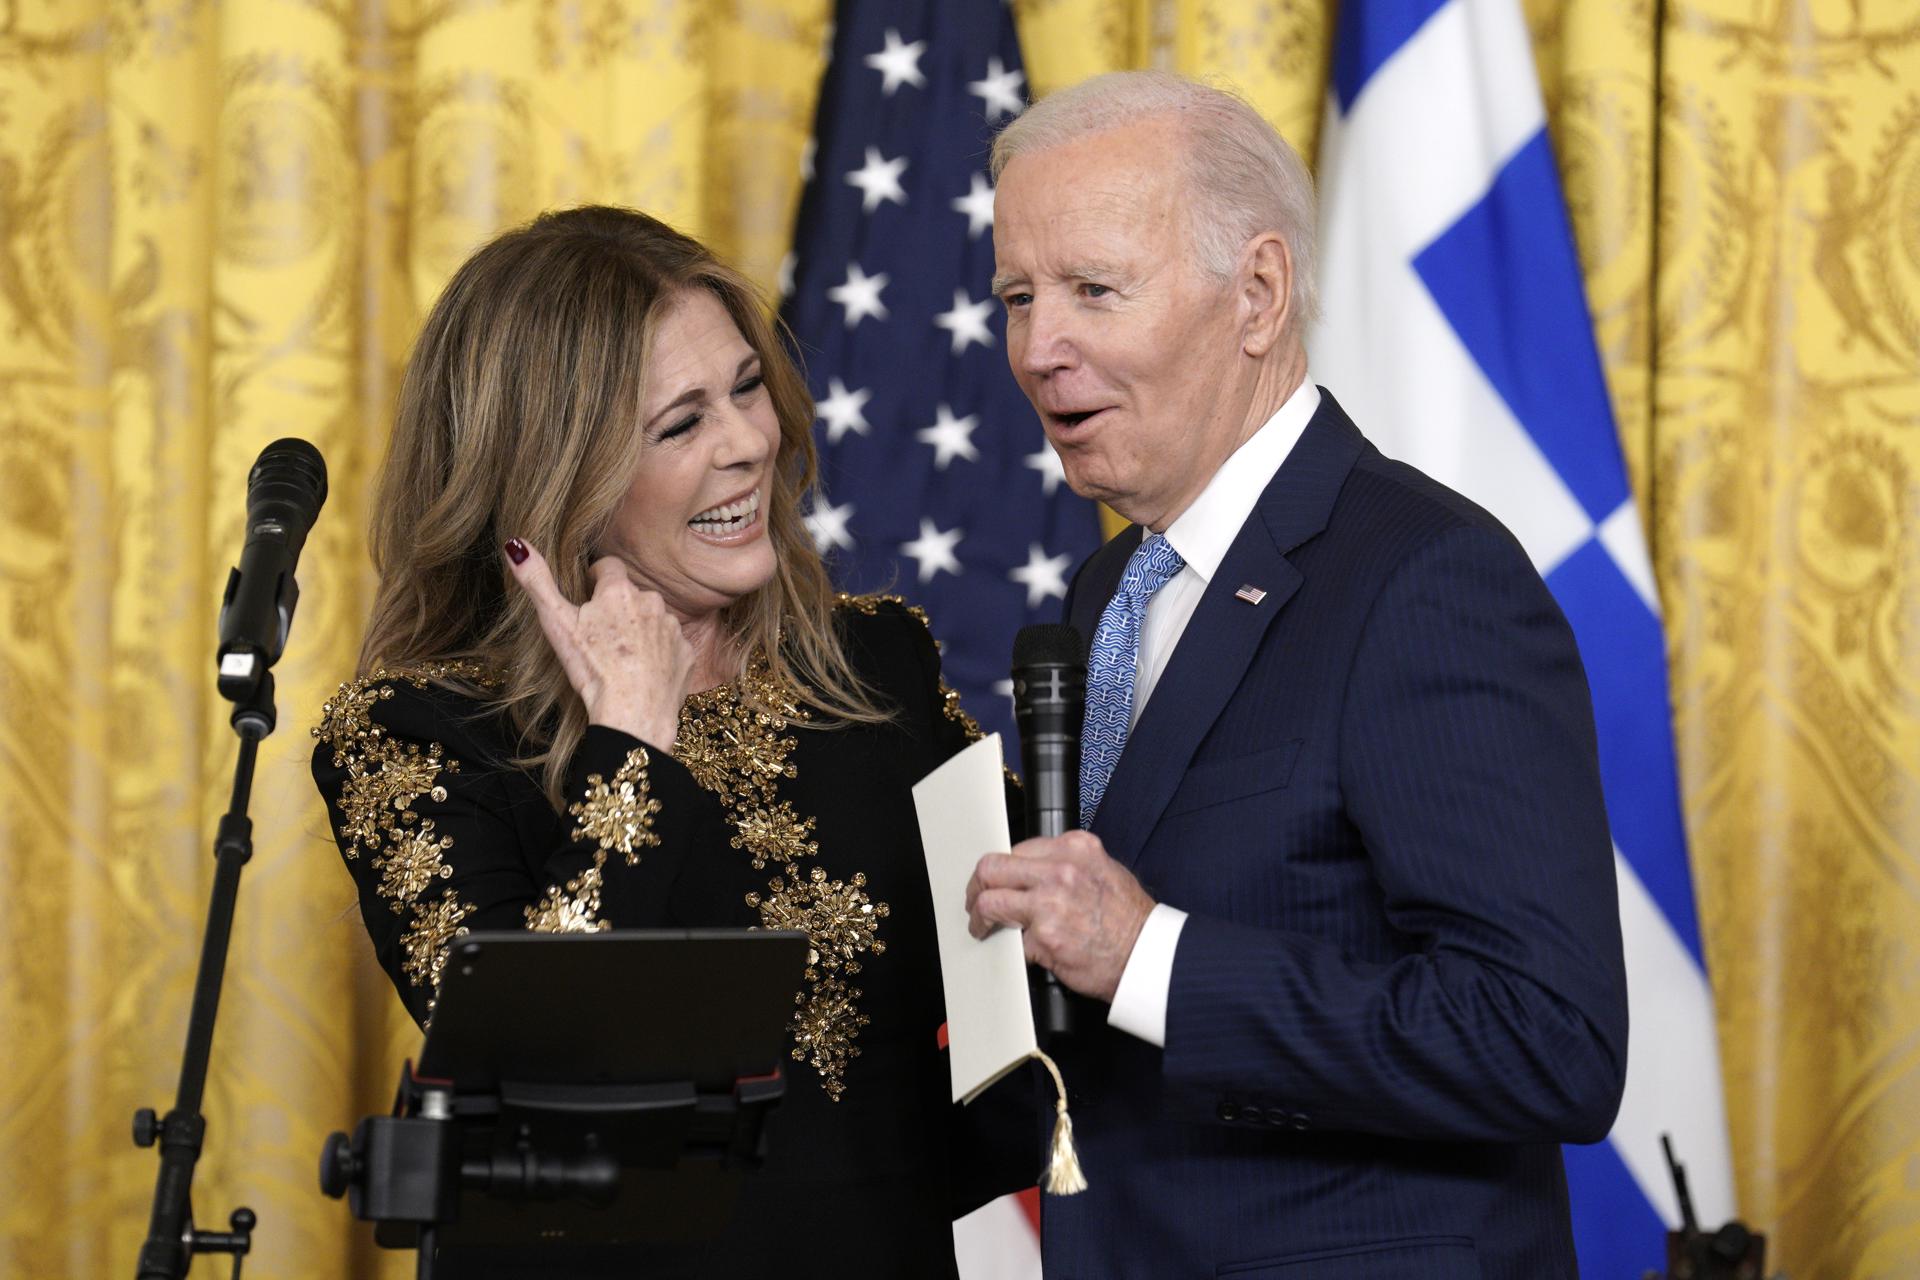 US President Joe Biden greets performer Rita Wilson at a reception celebrating Greek Independence Day in the East Room at the White House in Washington, DC, USA, on 29 March 2023. EFE-EPA/Yuri Gripas / POOL